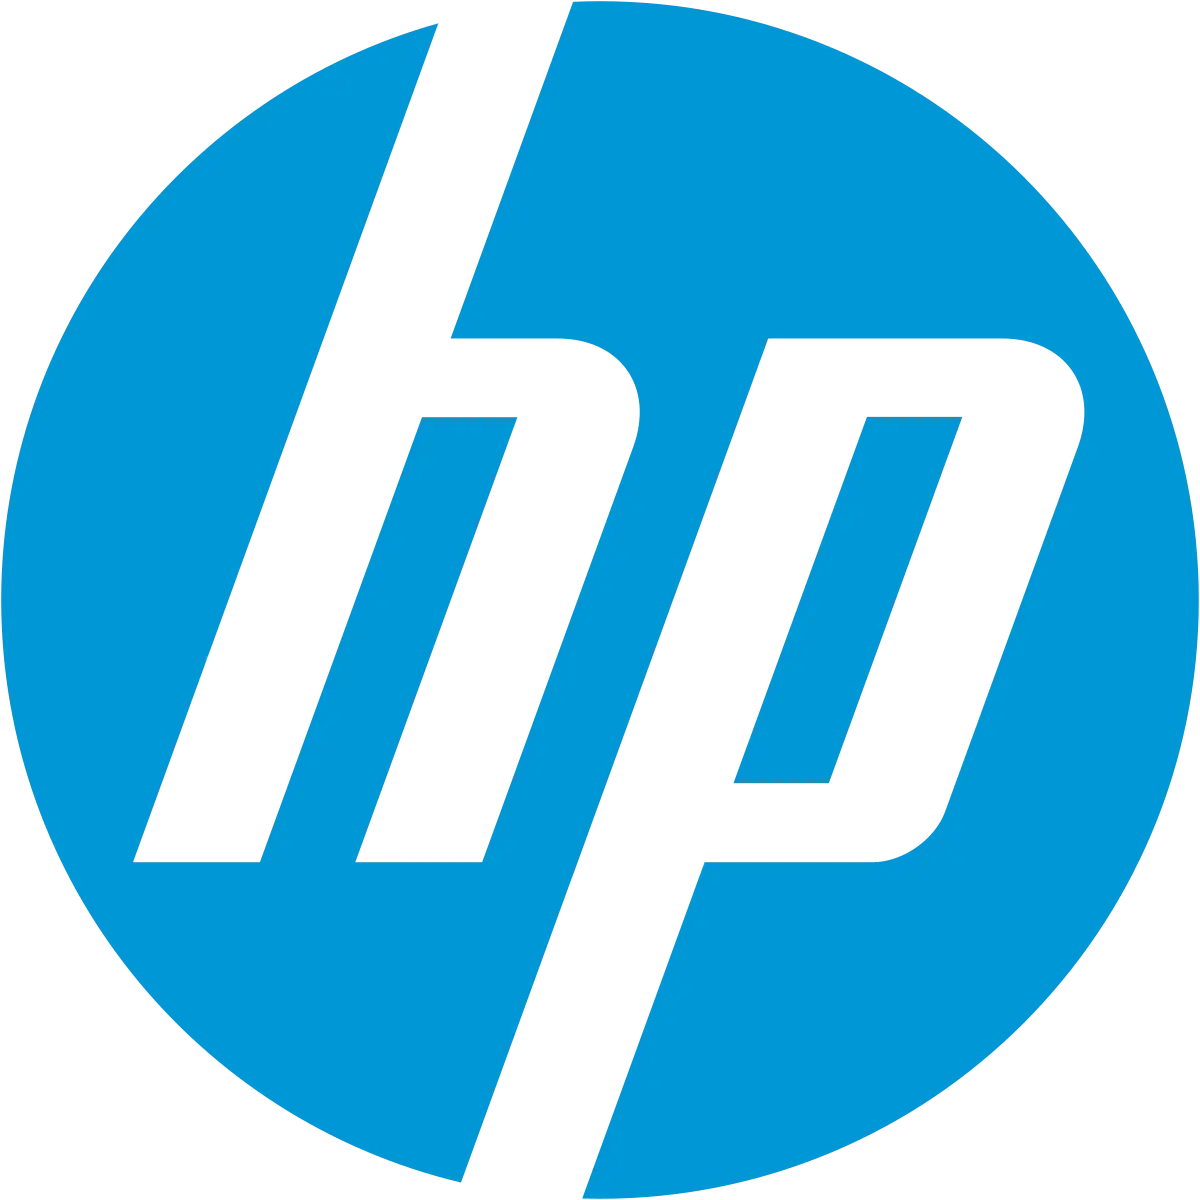 where is hewlett packard made - Is HP Made in China